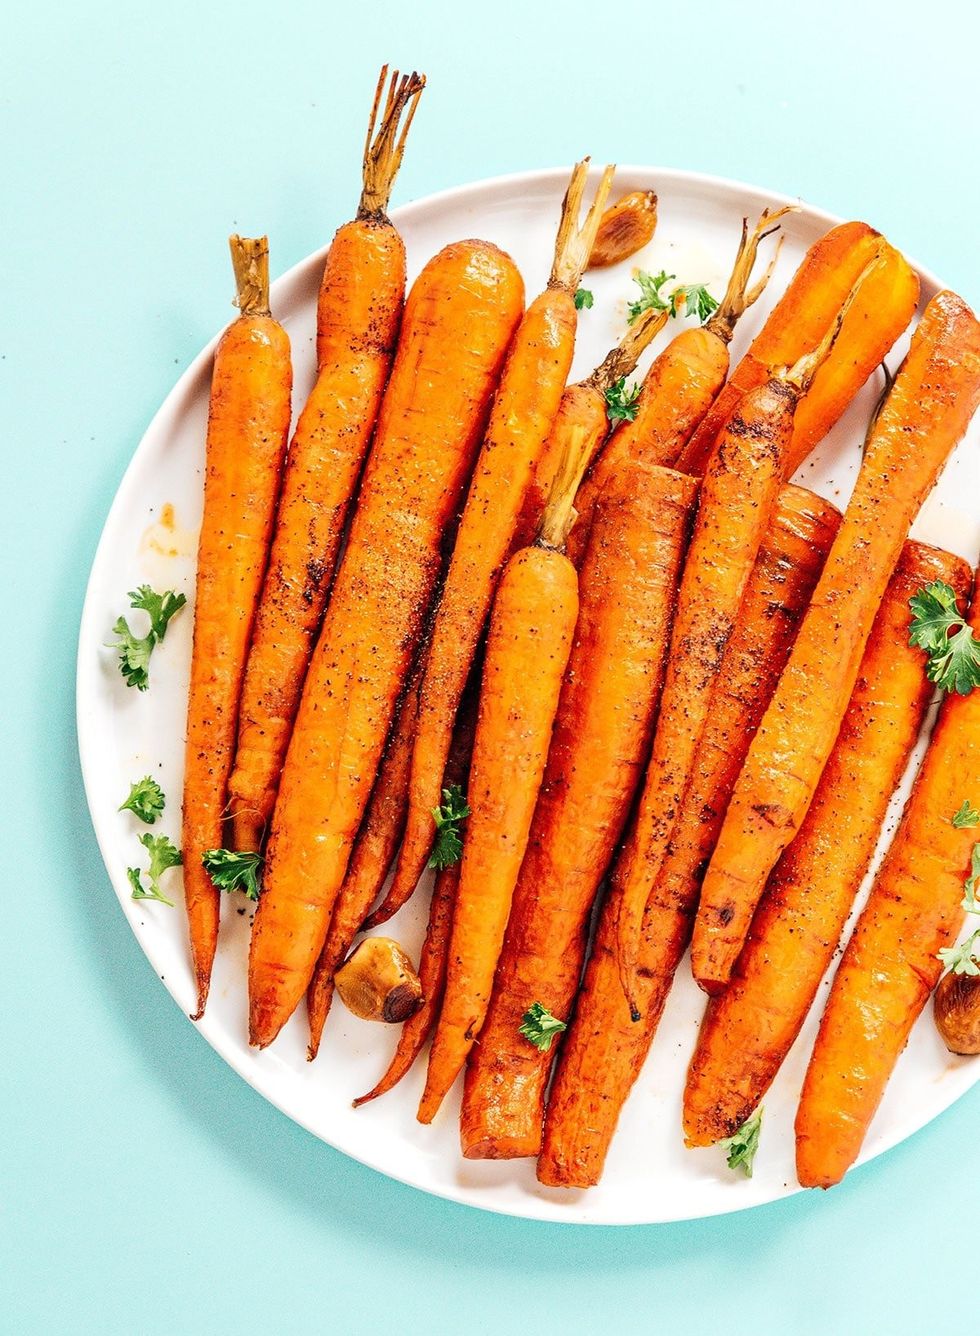 Slow-Cooker Carrots with Garlic Glaze